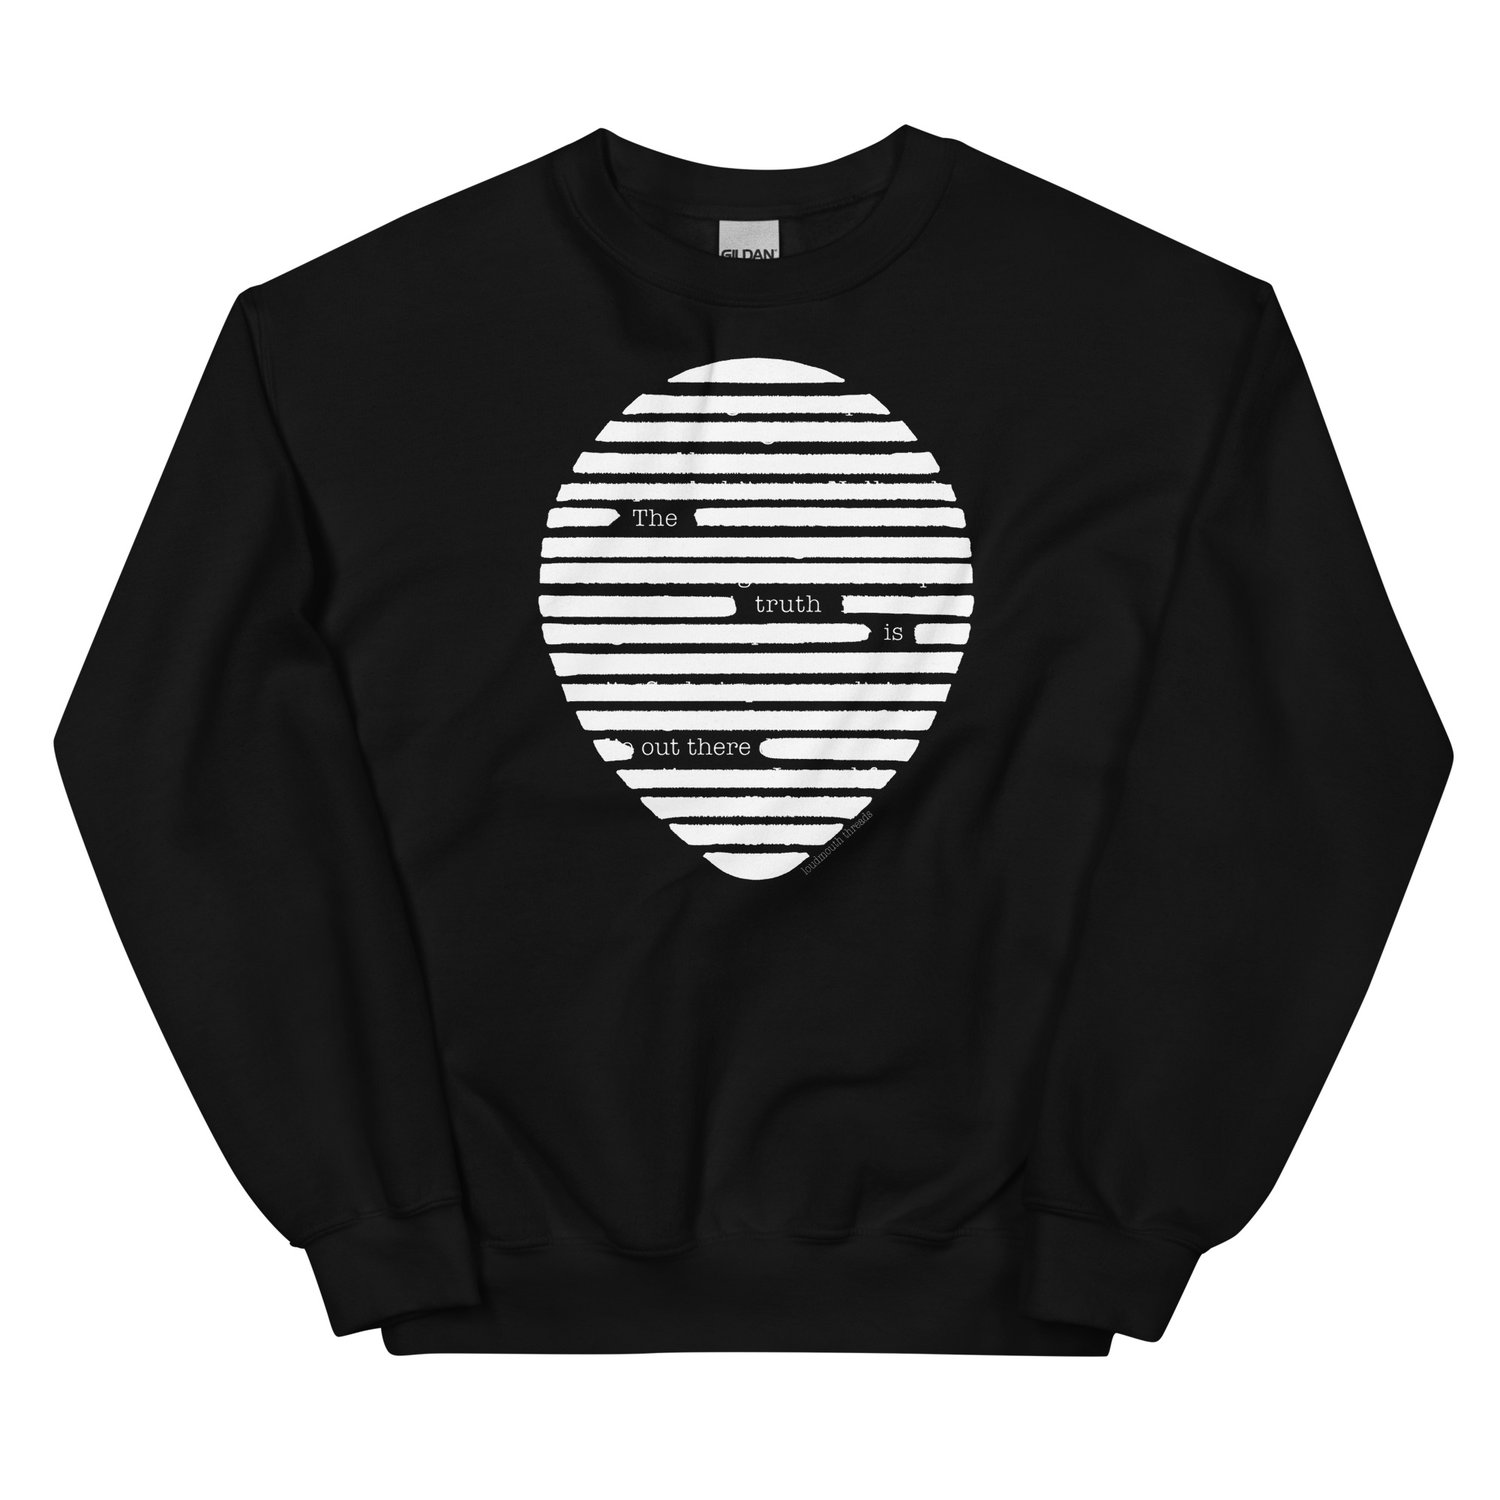 Image of The Truth Is Out There crew neck sweatshirt